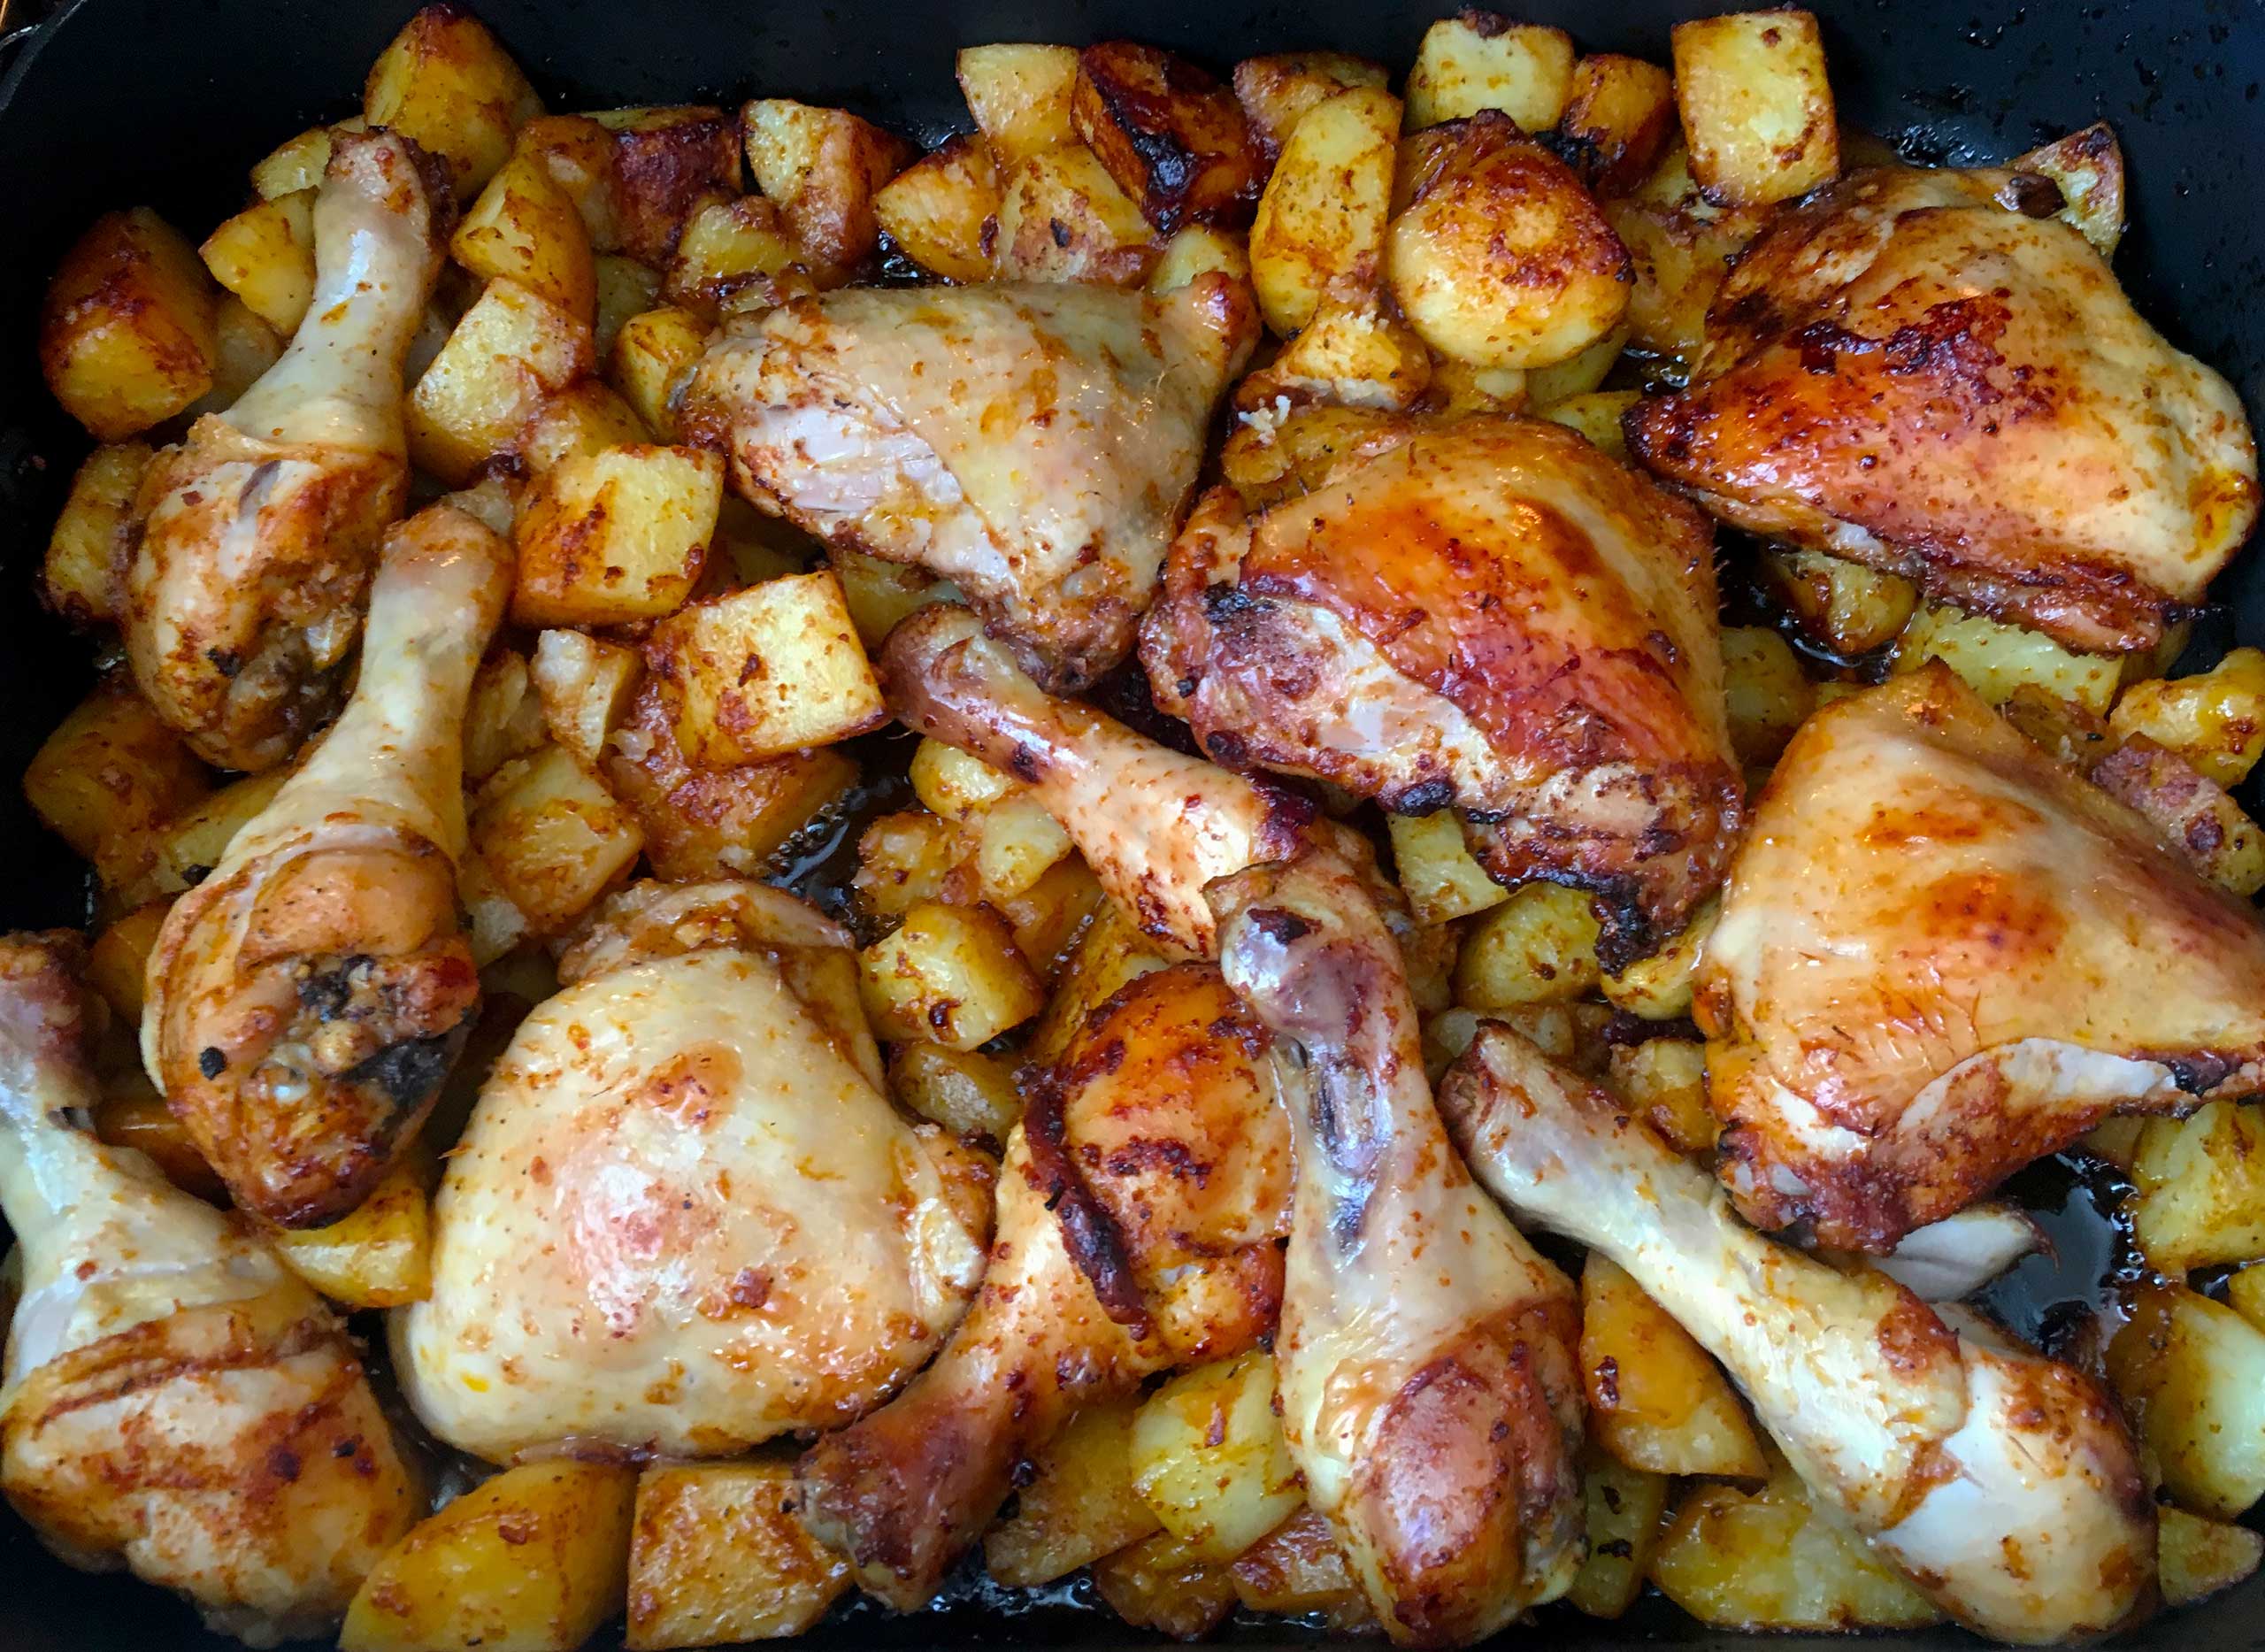 Baked chicken and potatoes